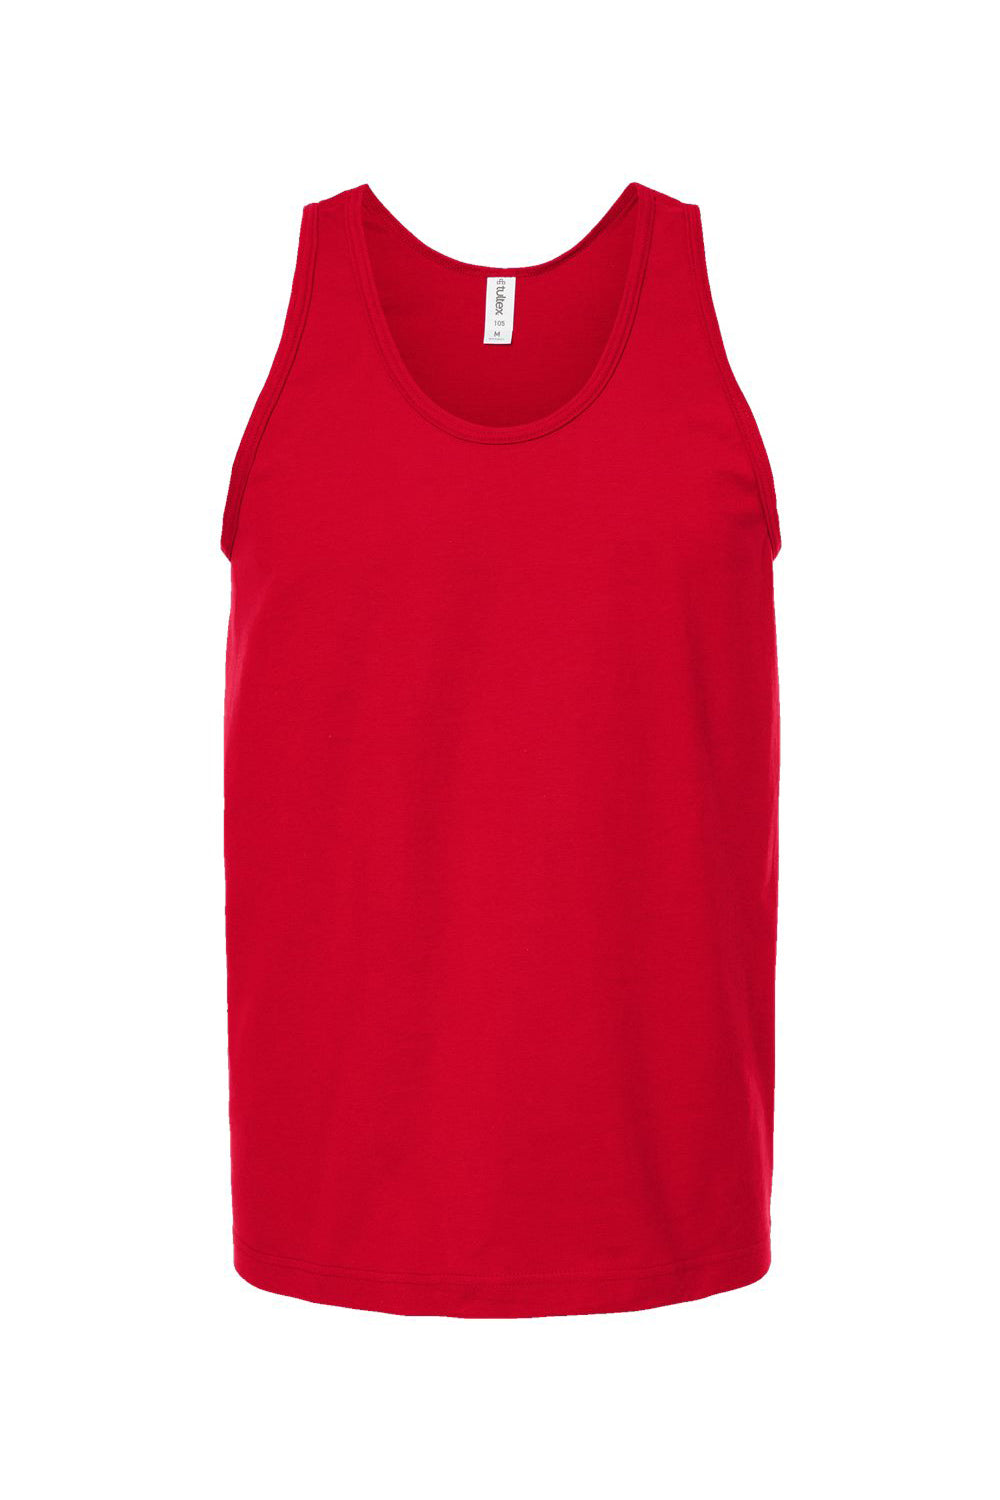 Tultex S105 Mens Fine Jersey Tank Top Red Flat Front